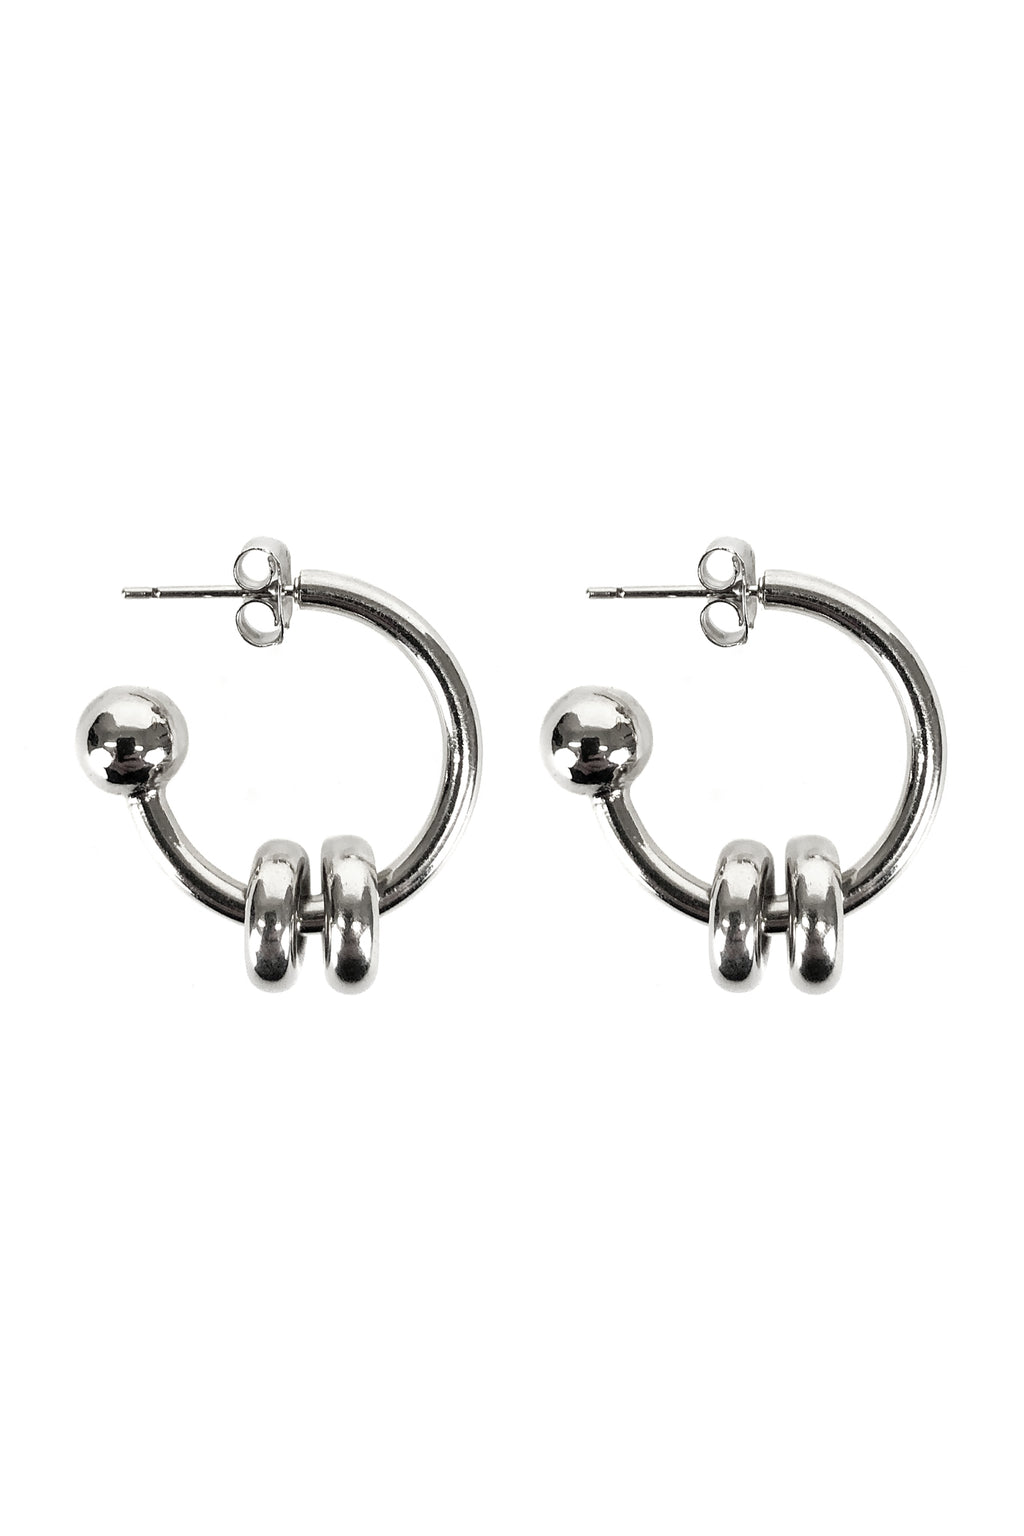 Justine Clenquet Alan Earrings, Palladium - BACK IN STOCK!